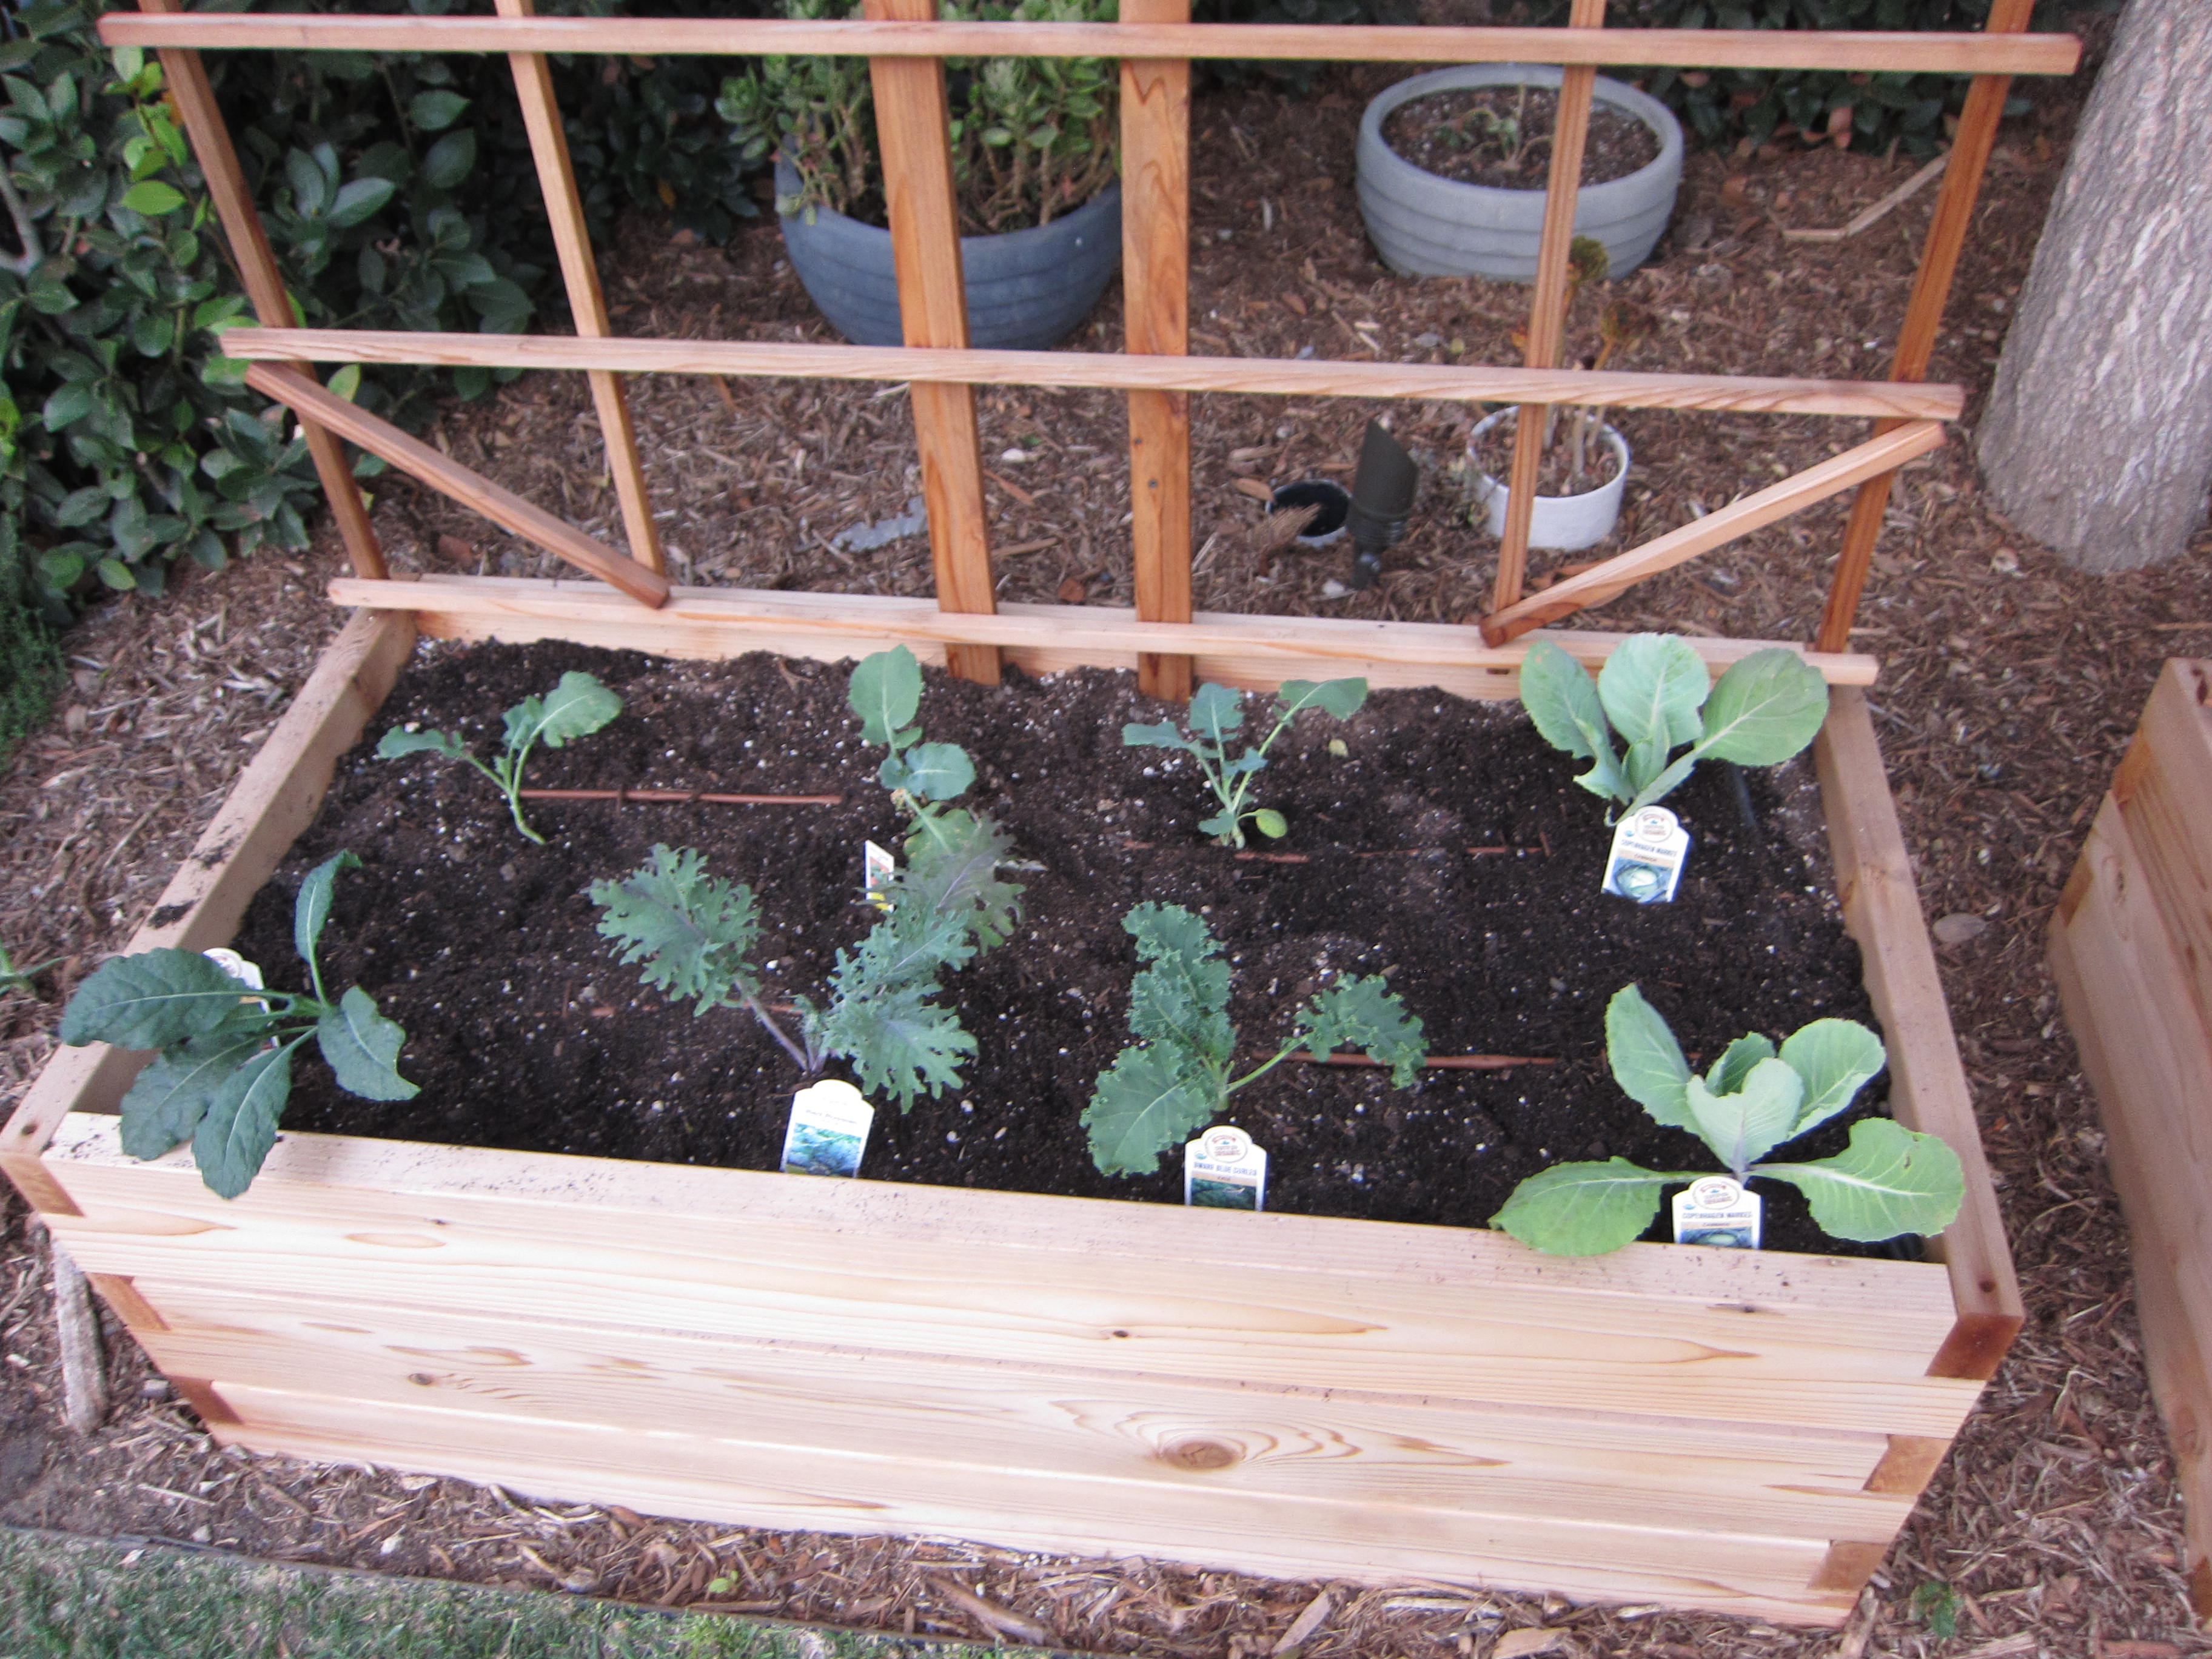 The brassica bed holds kale, broccoli, and cabbage. It's a sampler garden.